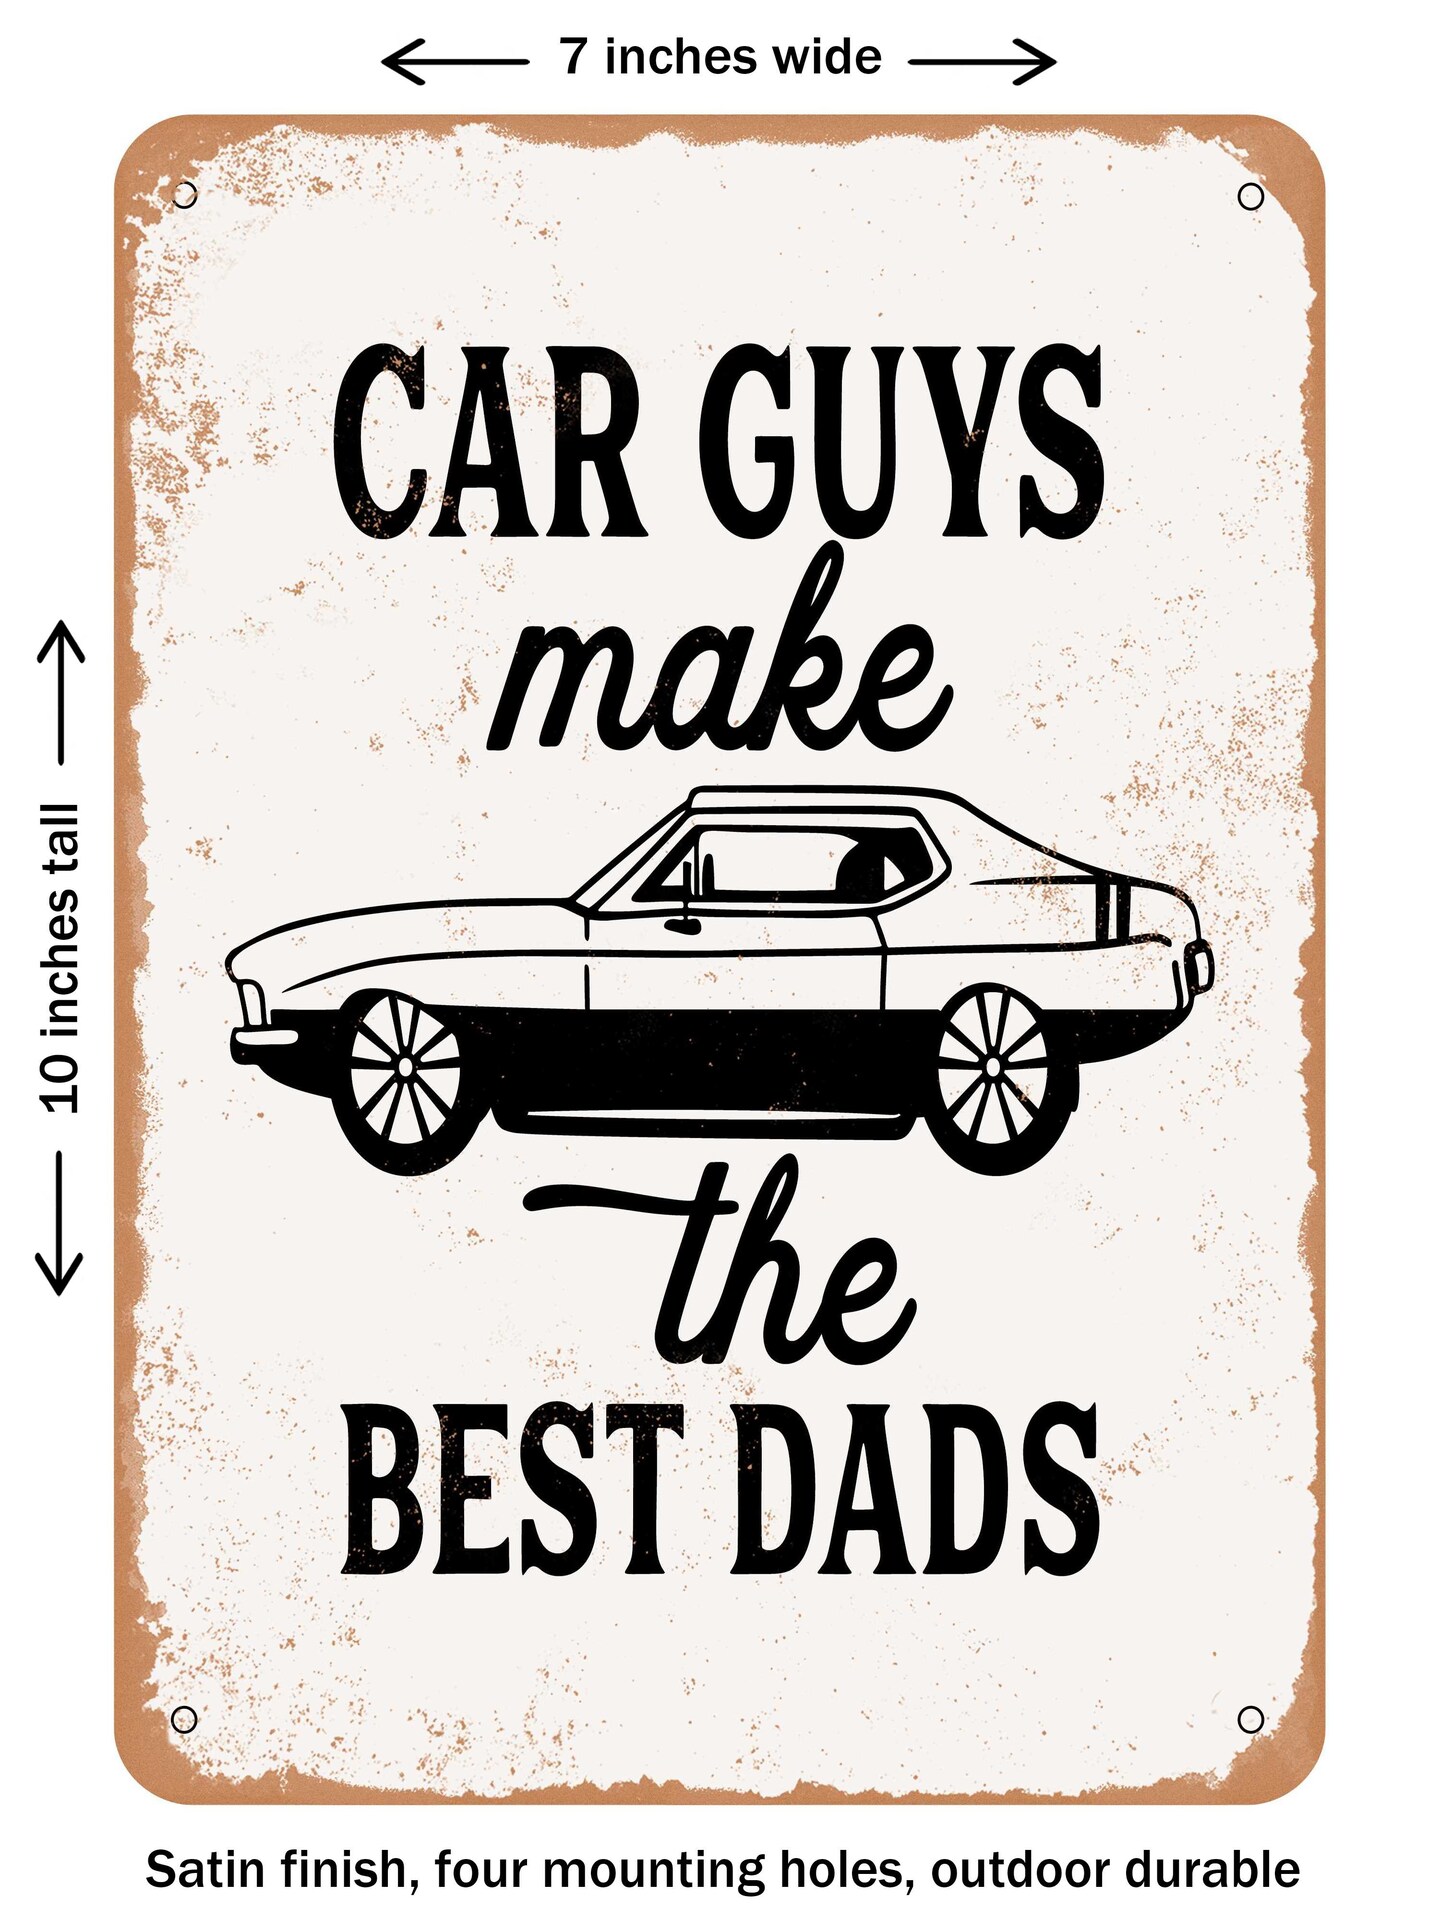 DECORATIVE METAL SIGN - Car Guys Make the Best Dads - 2 - Vintage Rusty  Look